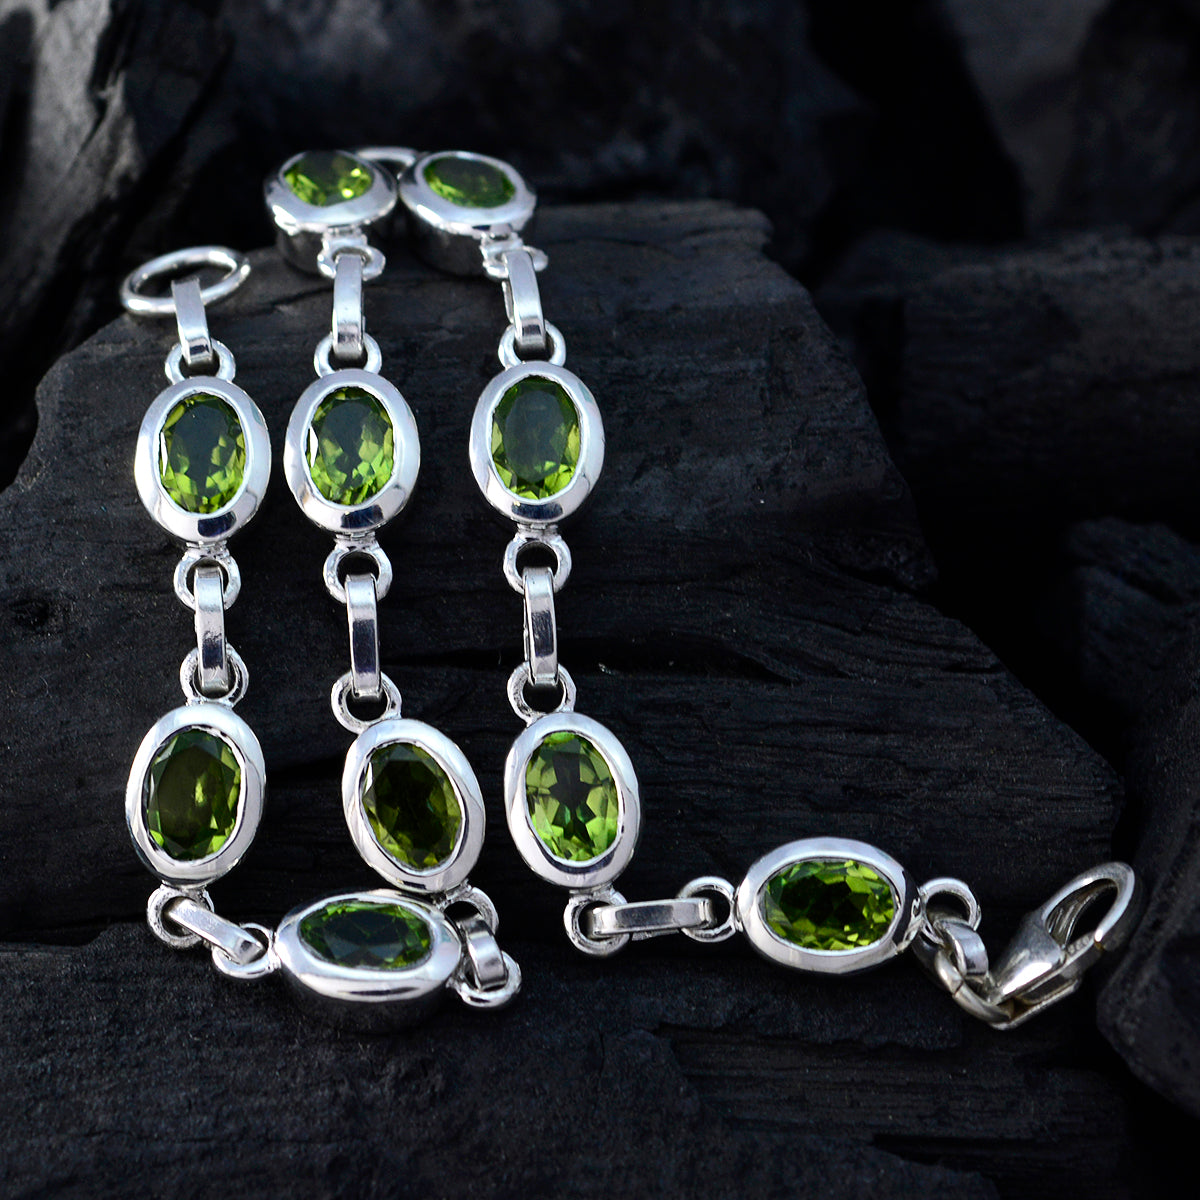 Riyo Genuine Gems Oval Faceted Green Peridot Silver Bracelets gift for independence day